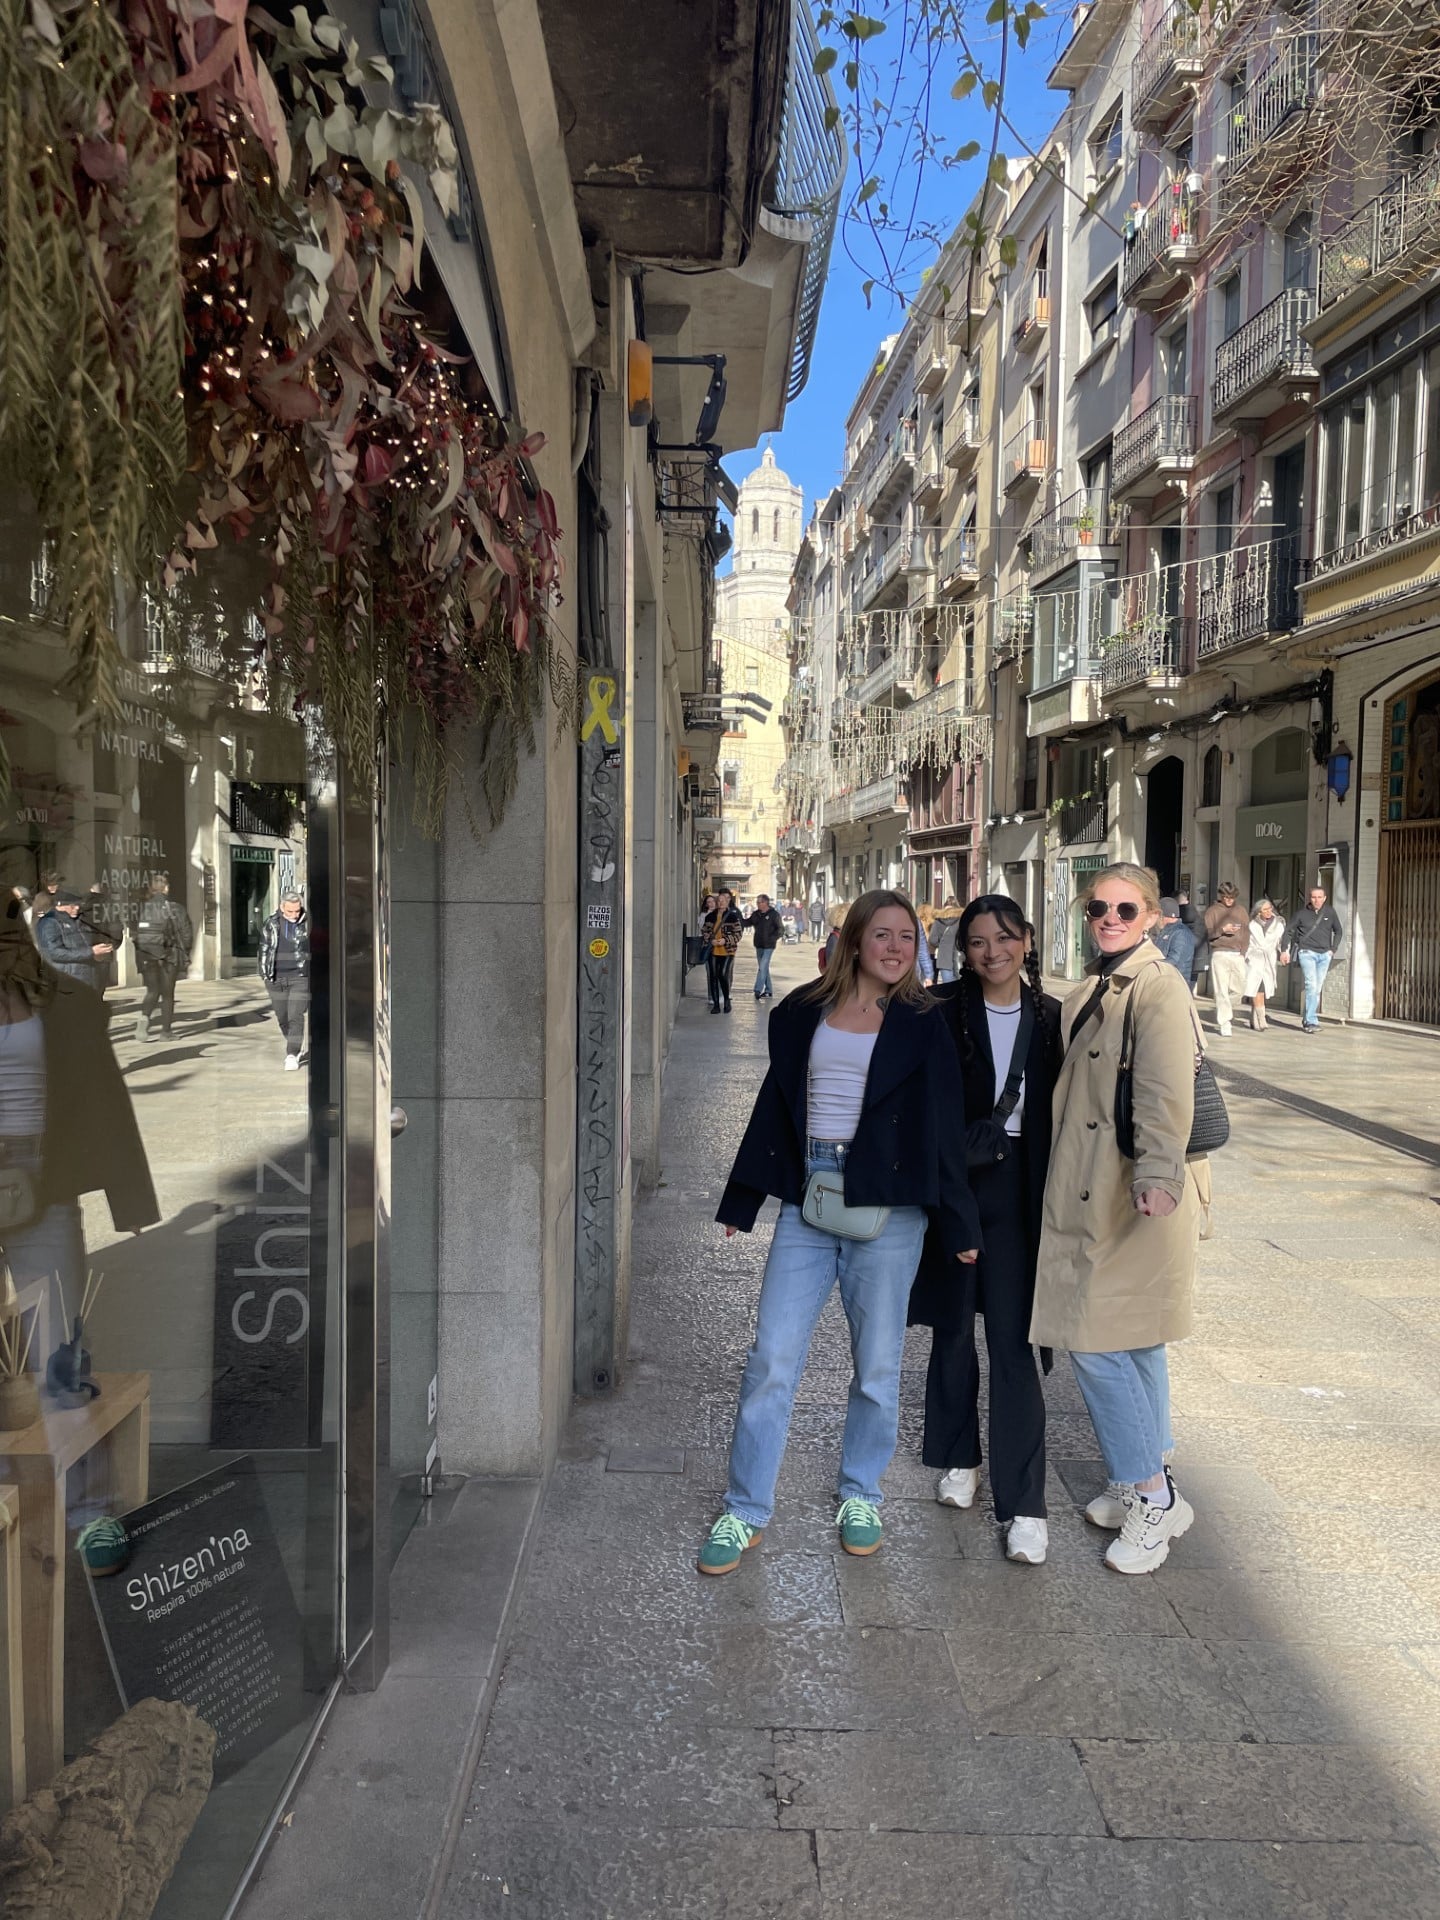 Author standing, posing with friends, in Barcelona